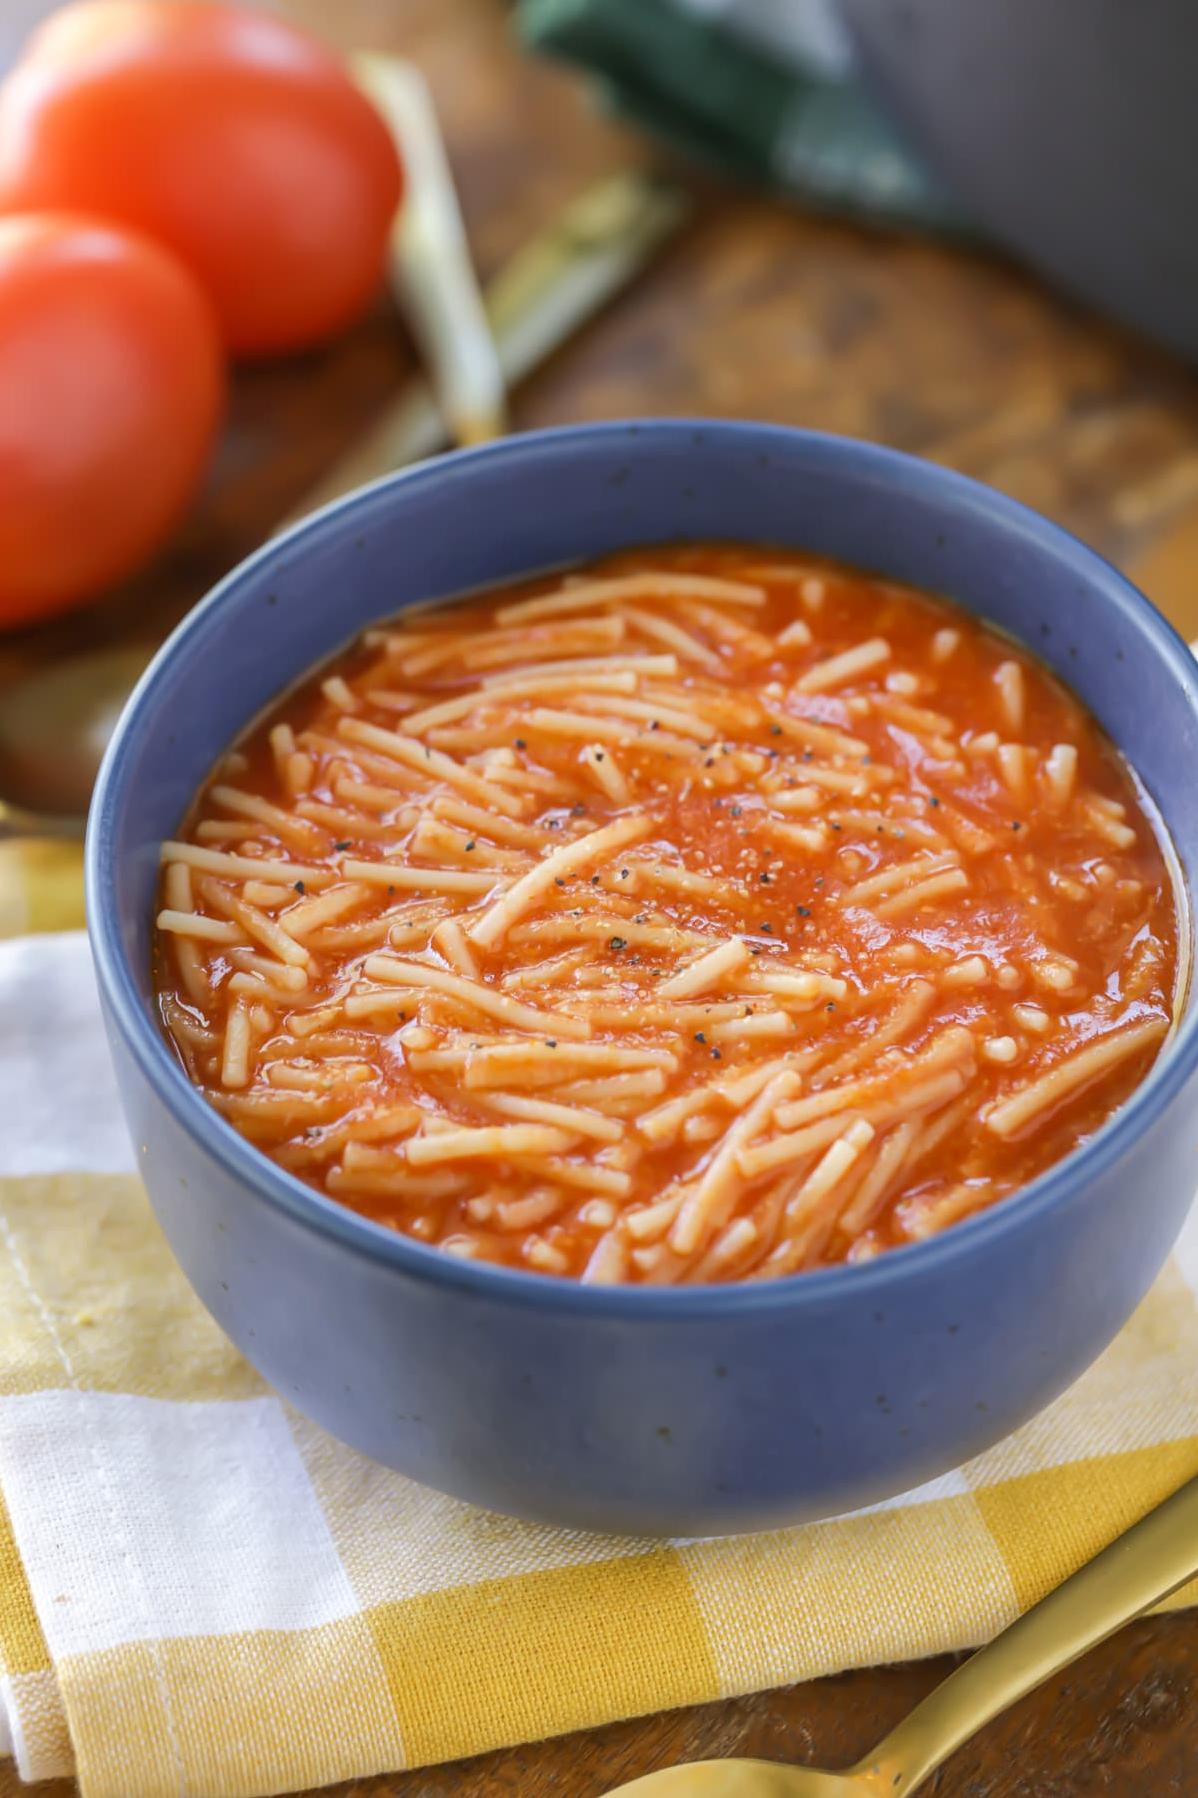  Warm up with a comforting bowl of Sopa De Pasta!